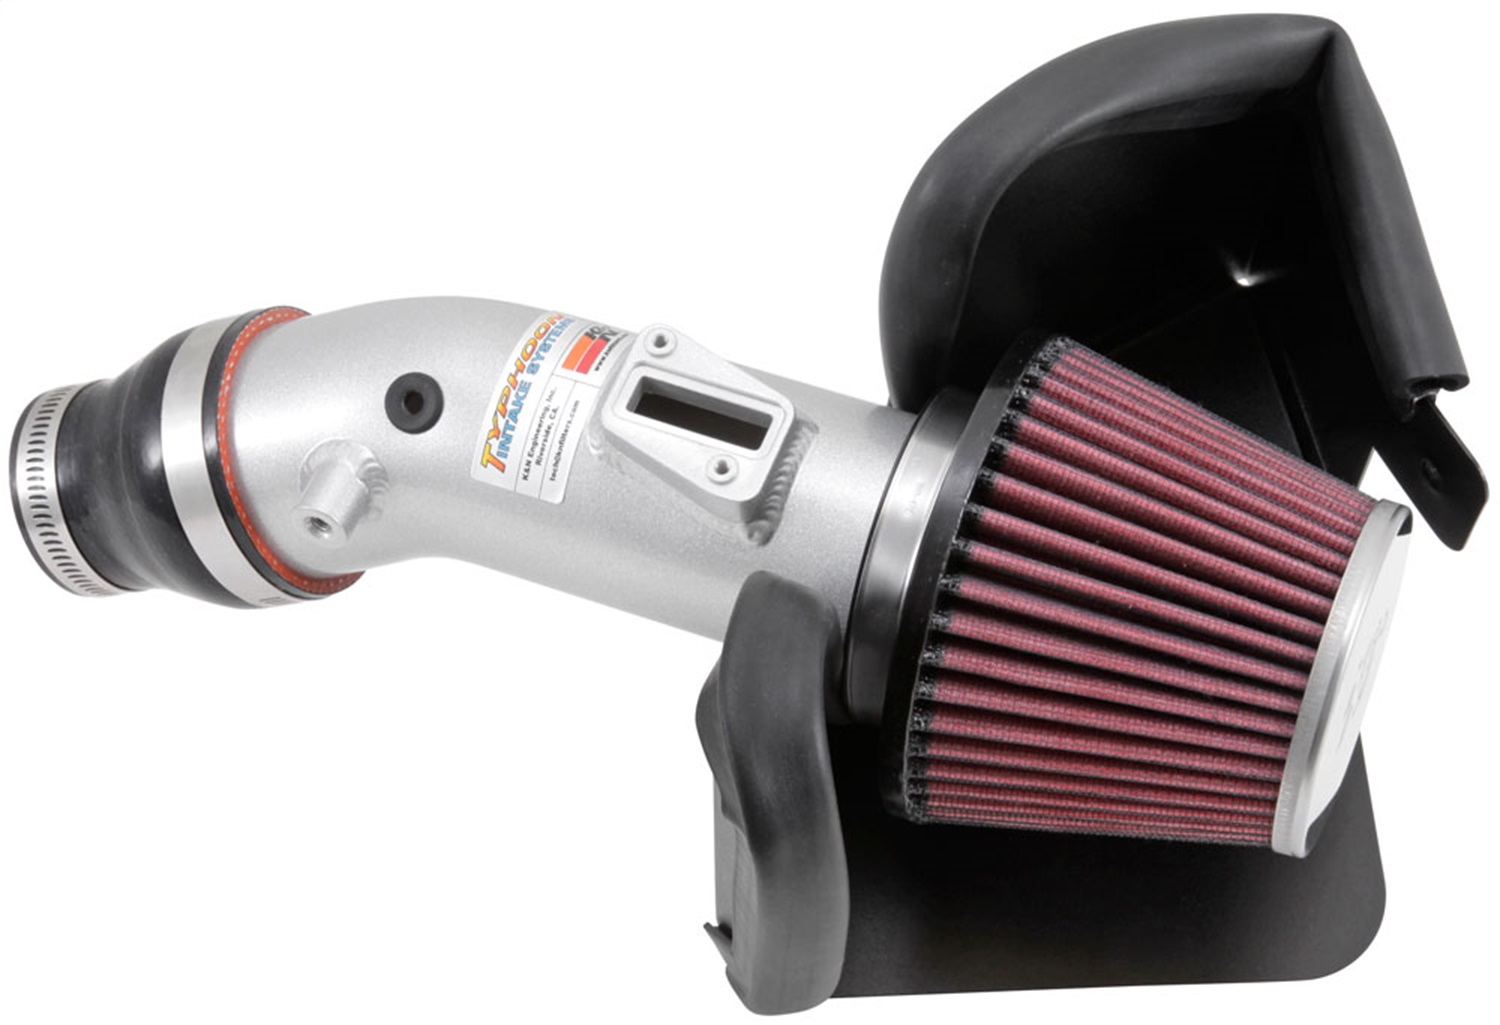 K&N Filters K&N Filters 69-7079TS Typhoon; Cold Air Intake Filter Assembly Fits 13-14 Juke